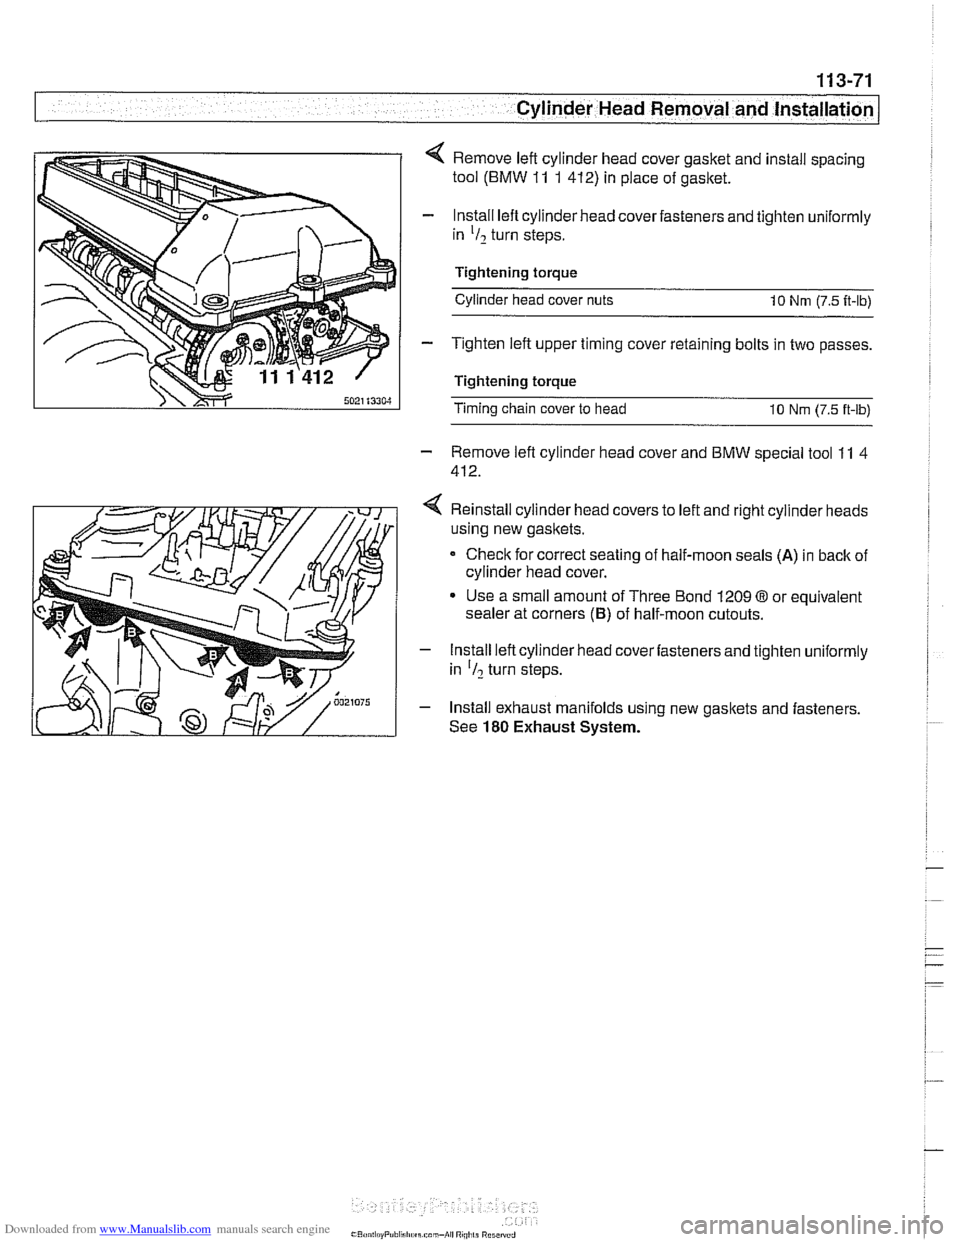 BMW 528i 2000 E39 Workshop Manual Downloaded from www.Manualslib.com manuals search engine 
. ." . . 
I - Cylinder Head Removal - and instard -- 
4 Remove left cylinder  head cover gasket  and install  spacing 
tool  (BMW 
11 1 412)  